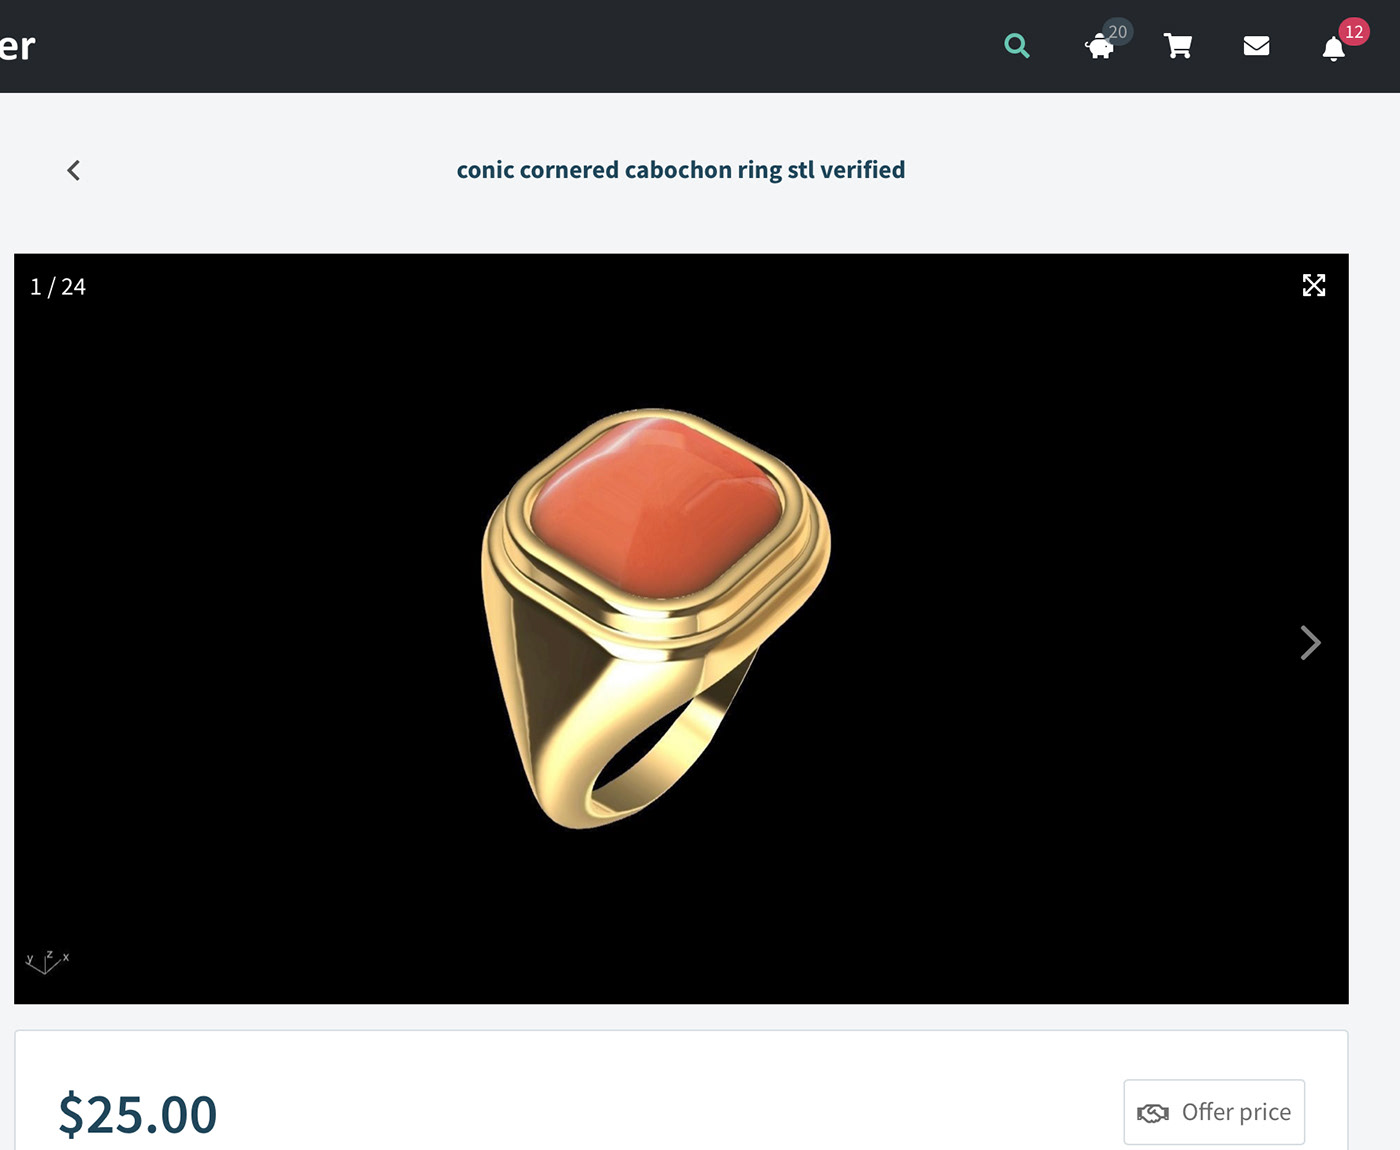 3d modeling 3D Rendering beauty Fashion  gold Jewellery jewelry Jewelry Design  ring Style